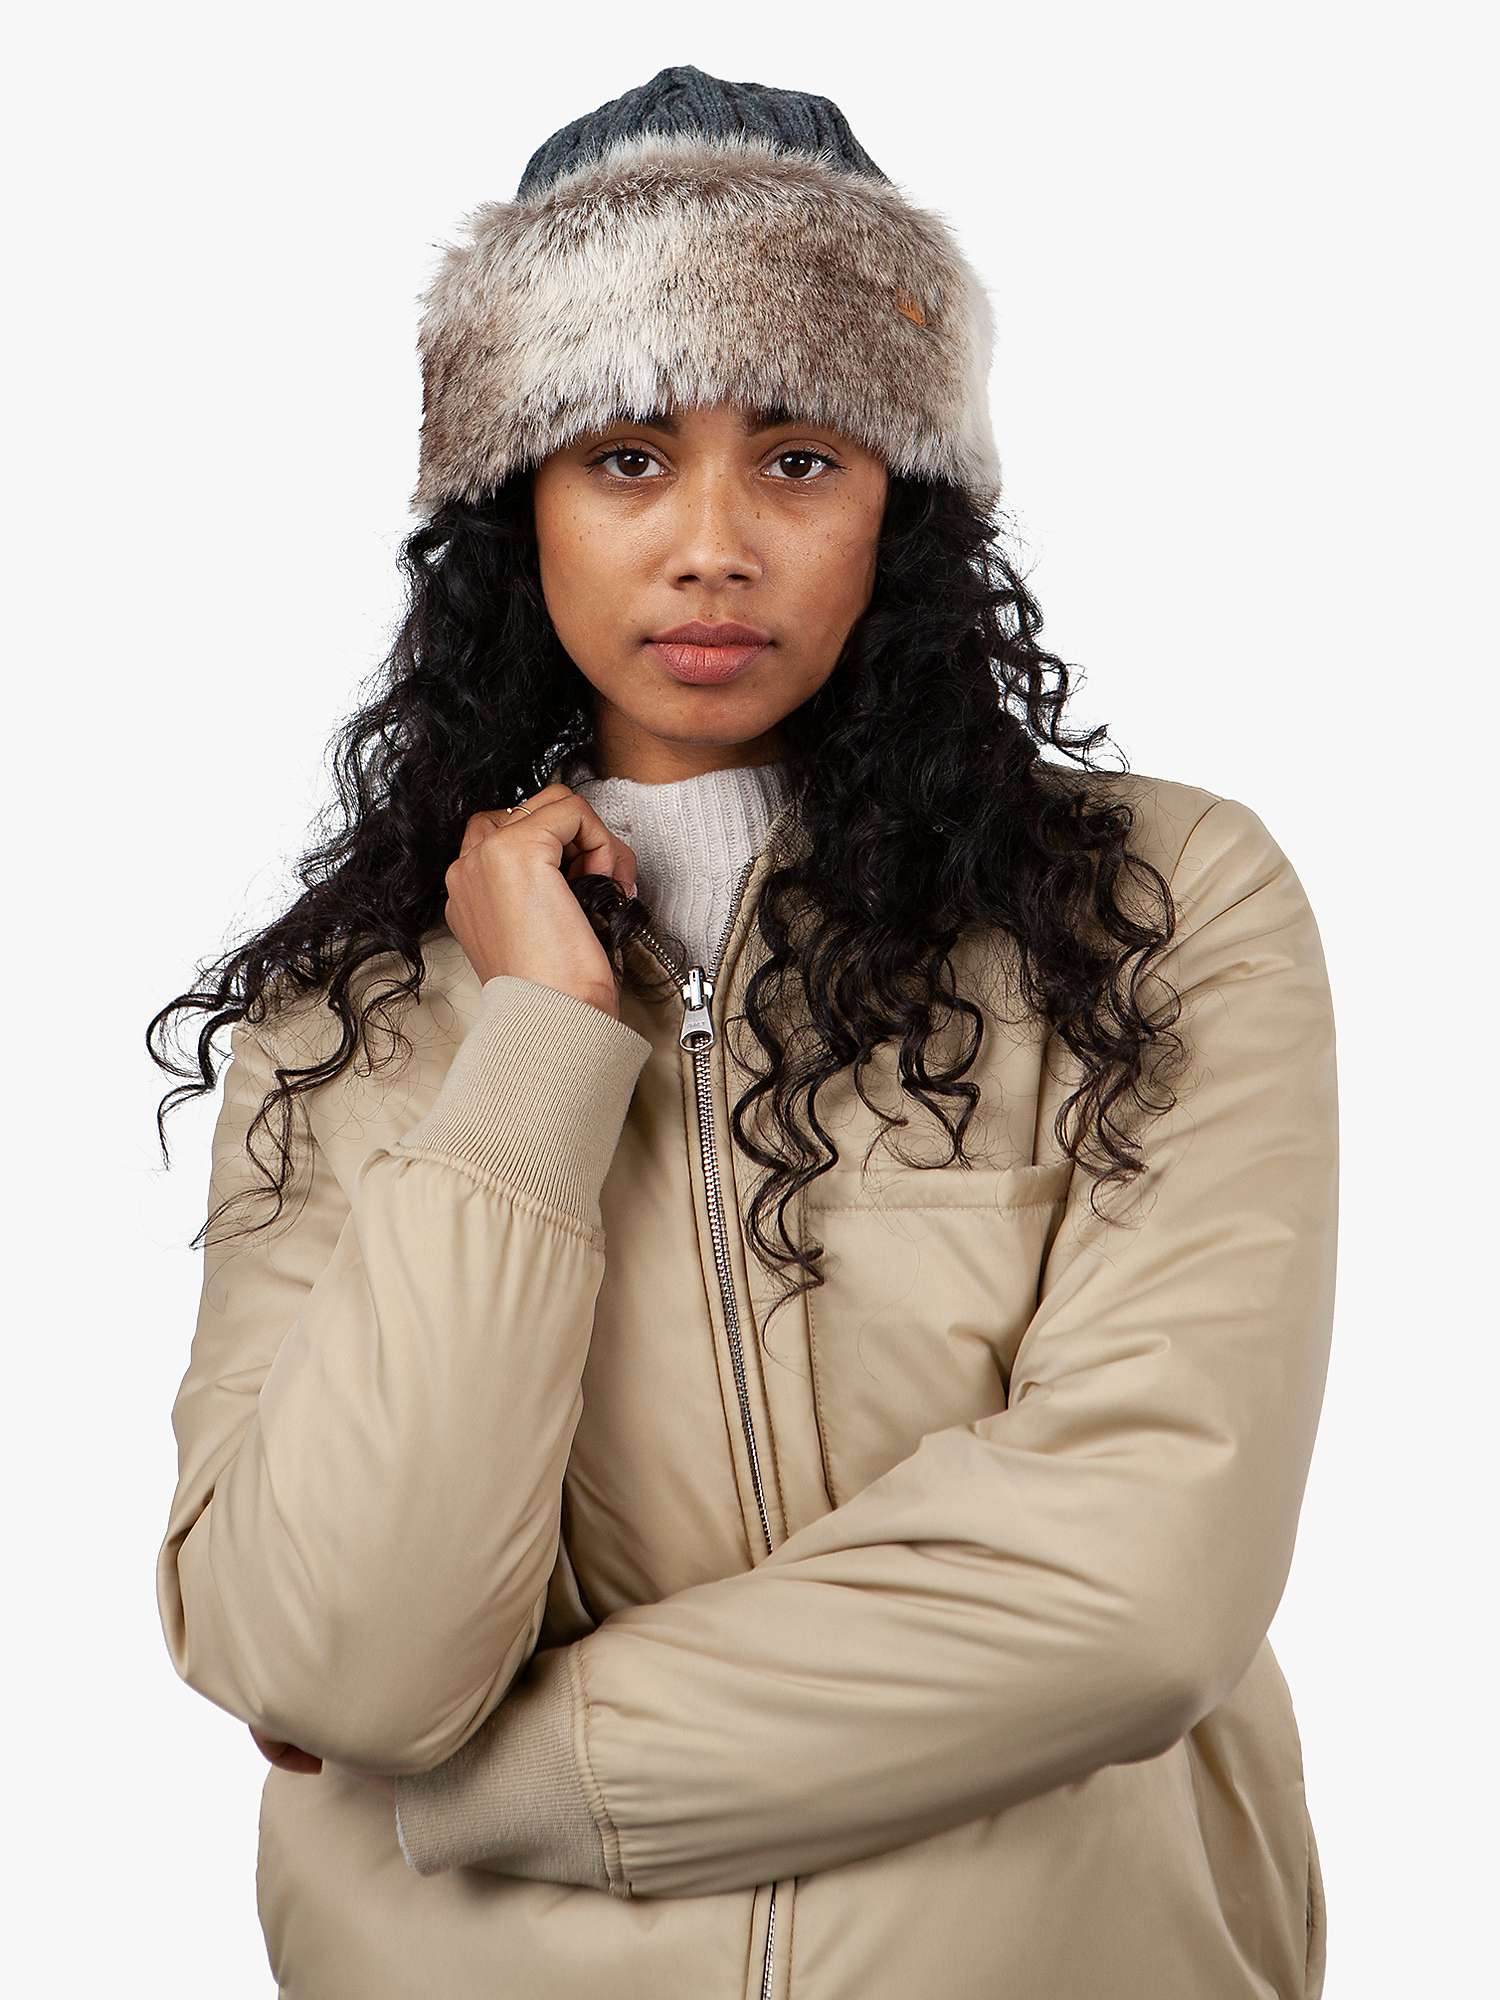 Buy Barts Faux Fur Cable Bandhat, One Size Online at johnlewis.com